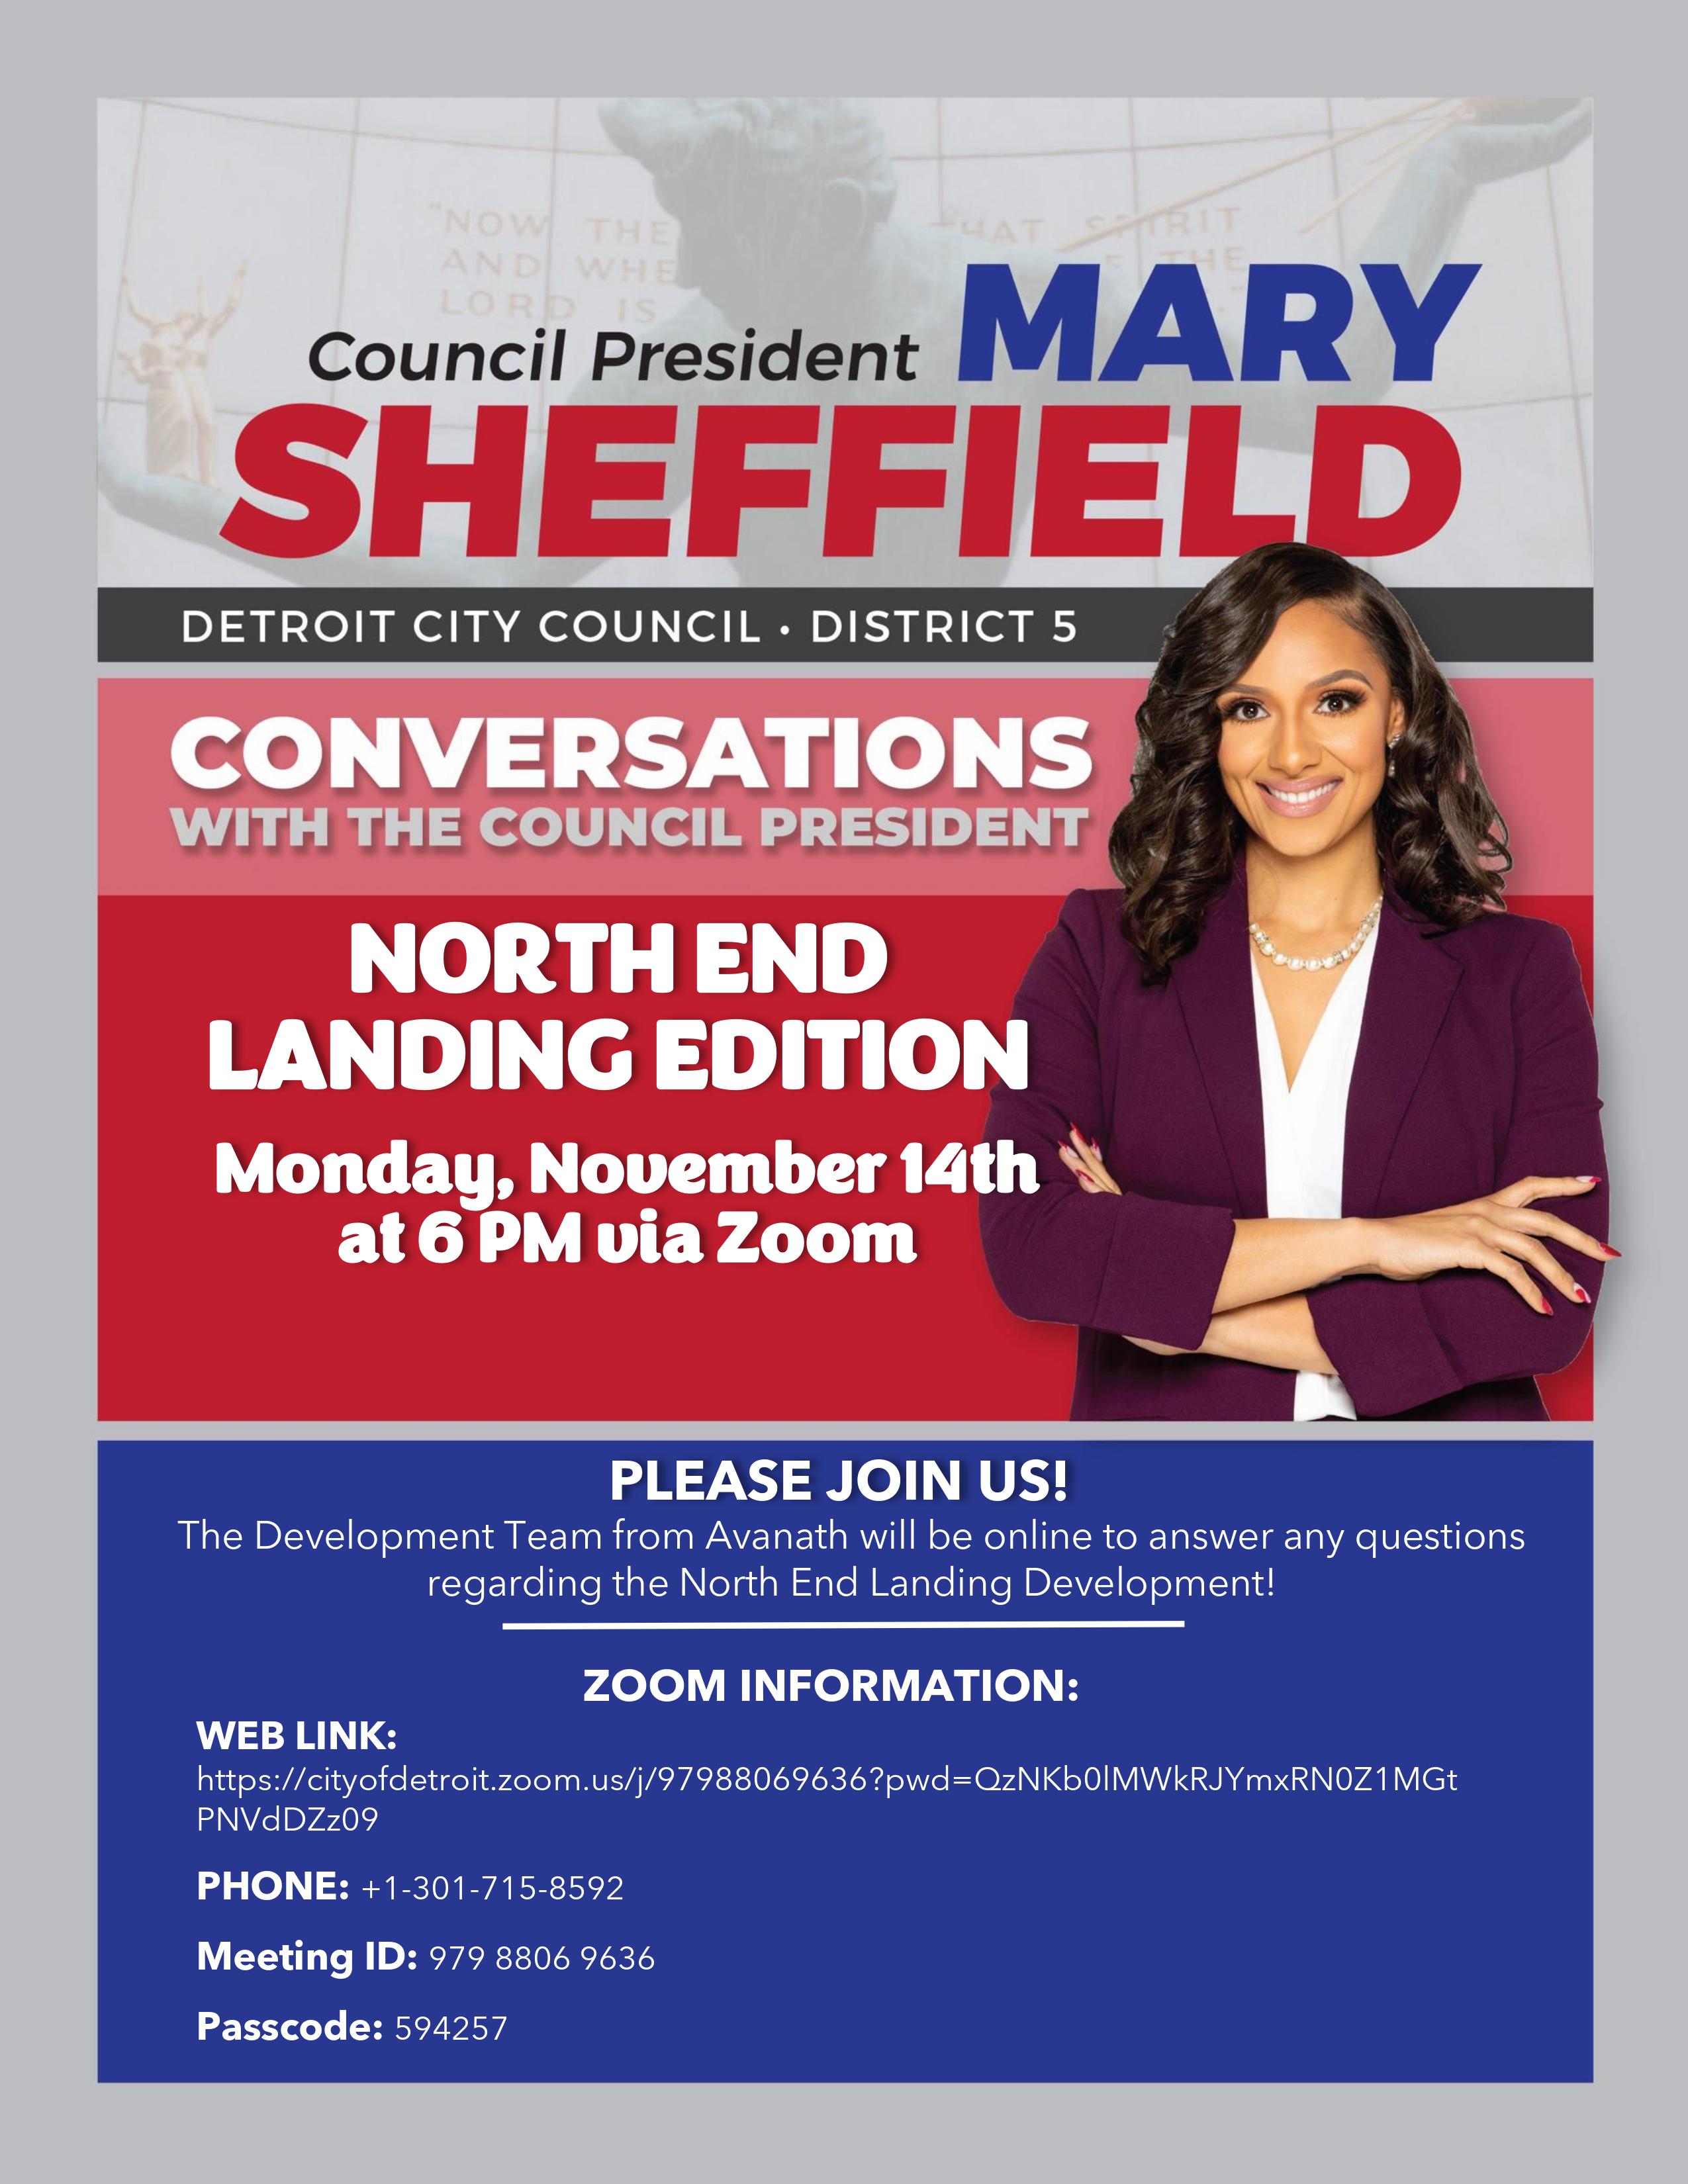 Council President Mary Sheffield to host Conversations with the Council President: North End Landing Edition on Monday, November 14th at 6 pm!